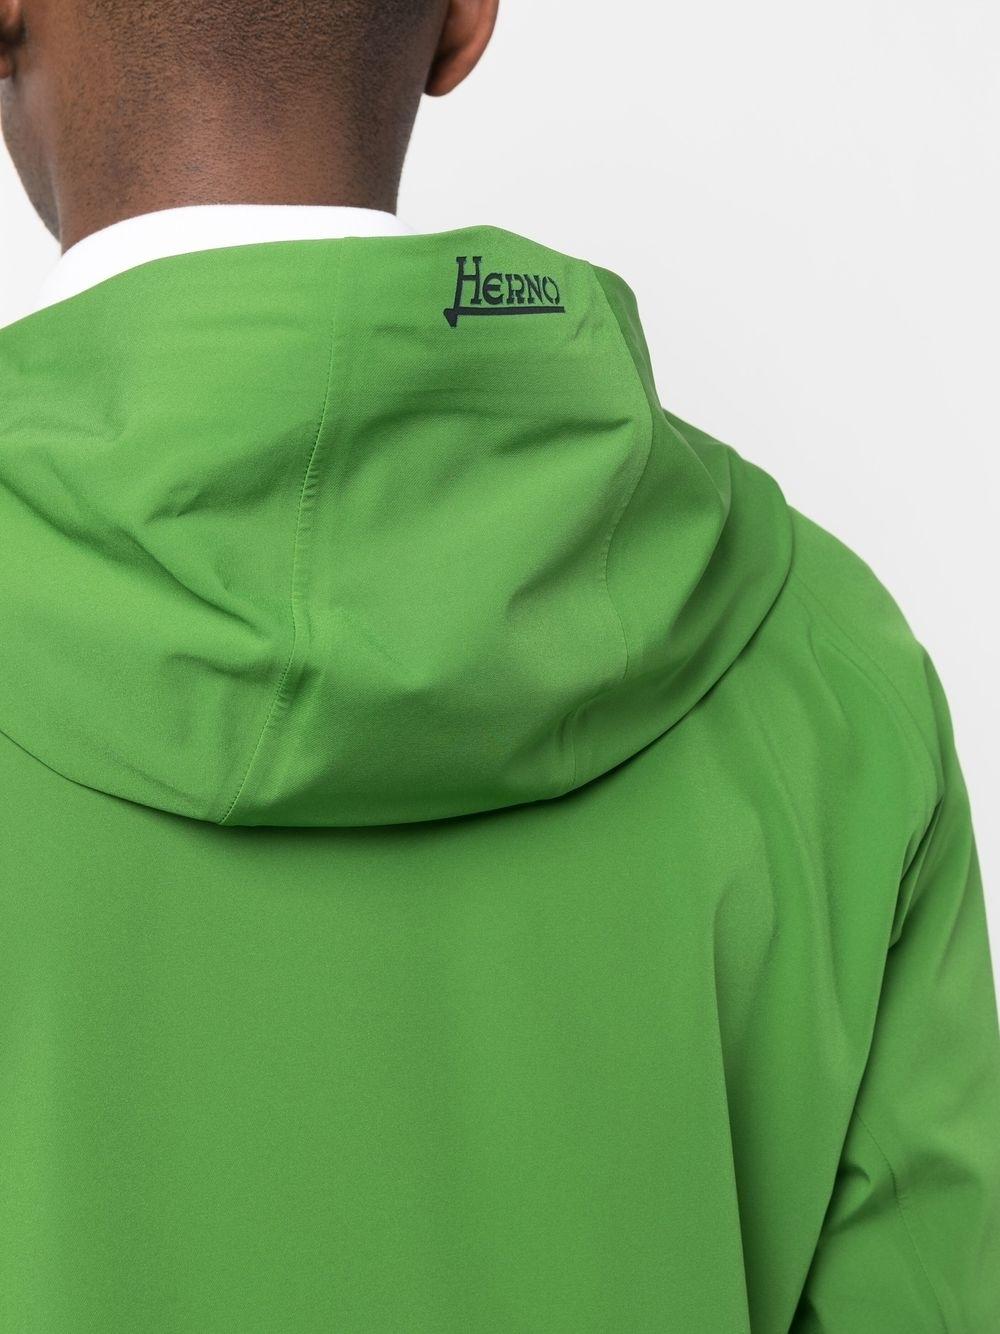 Herno High-neck Hooded Jacket in Green for Men | Lyst